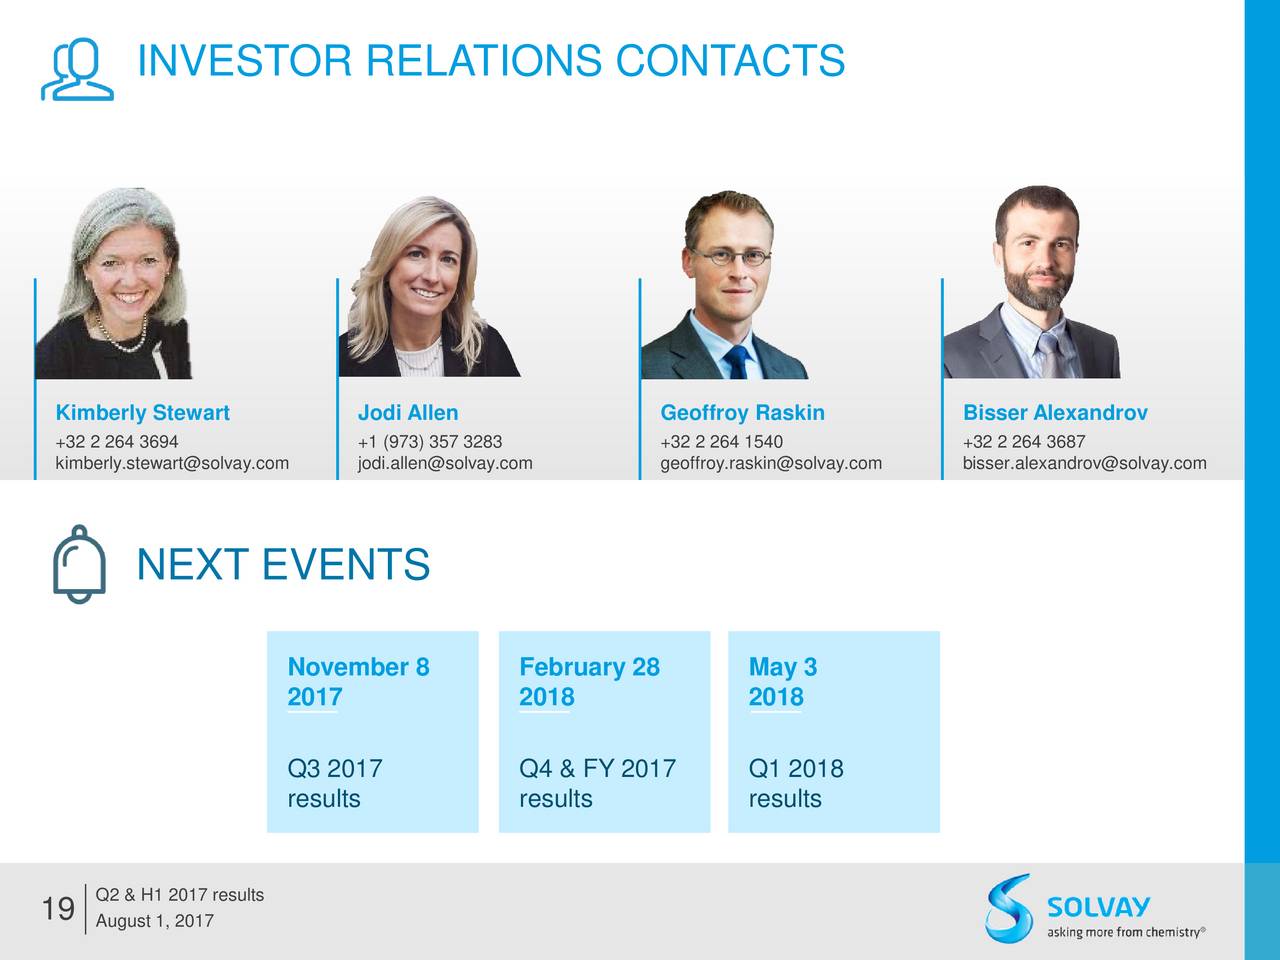  INVESTOR RELATIONS CONTACTS